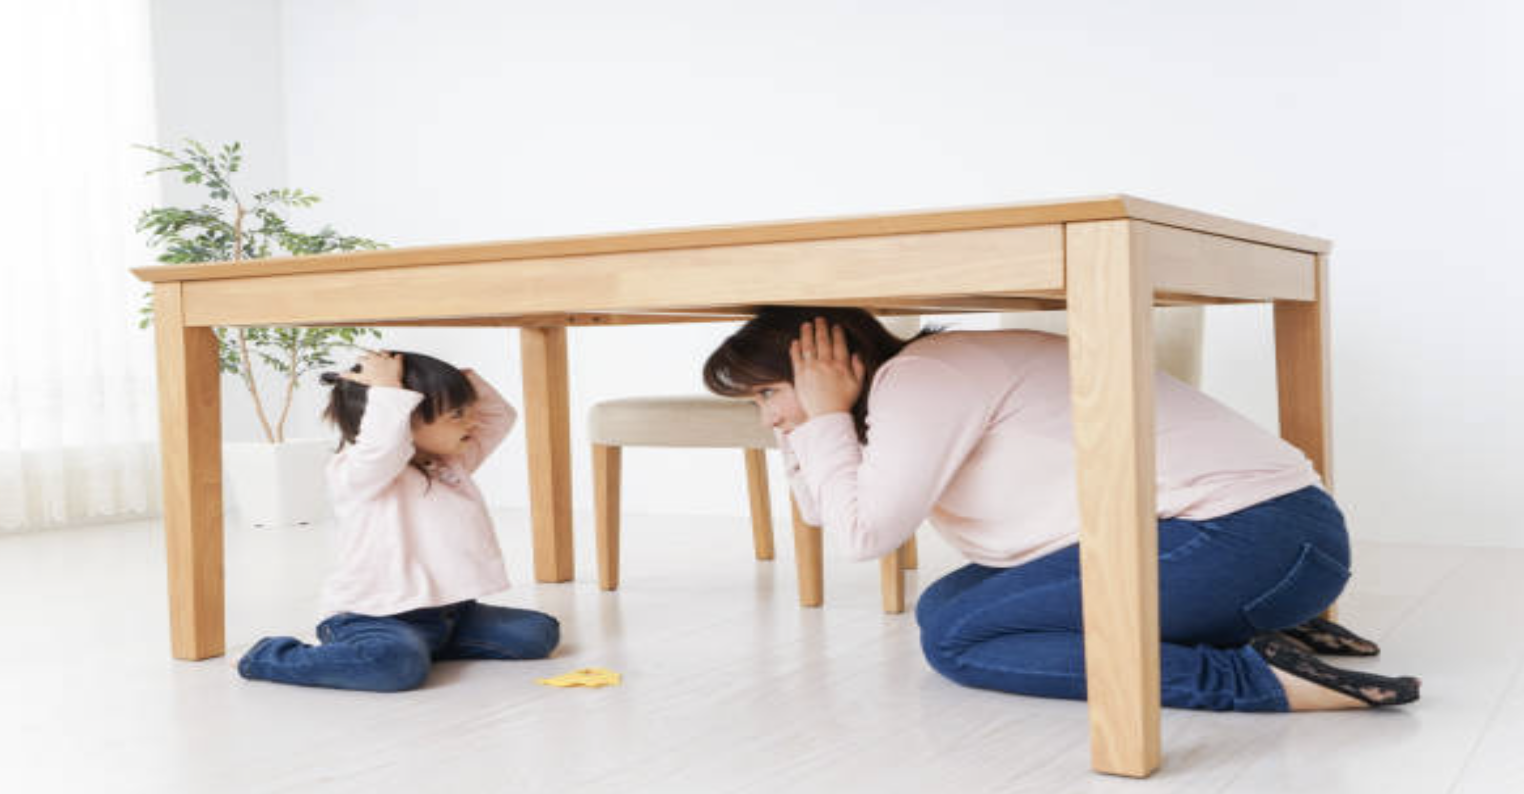 Child/woman under table